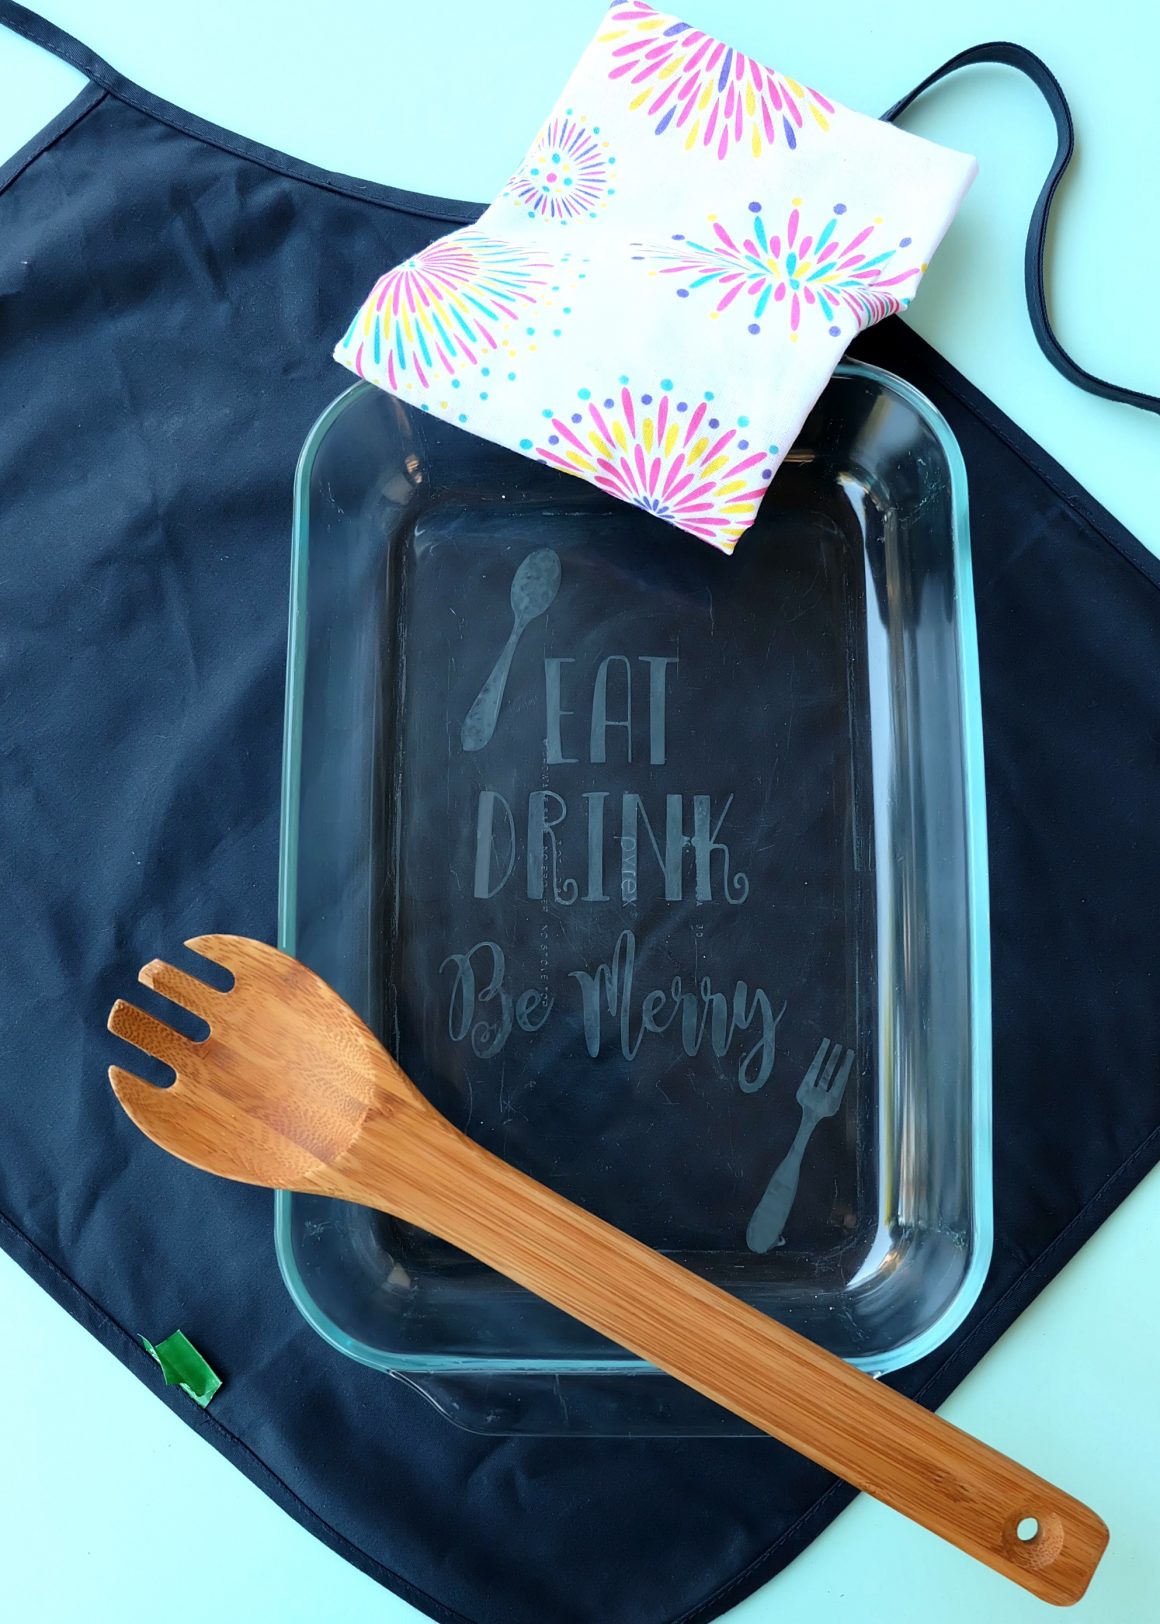 Making a gorgeous DIY Etched Glass Casserole Dish is so easy and makes a wonderful personalized handmade gift! Step by step photos are in this fun tutorial. A fun Cricut project that is perfect for wedding gifts, housewarming parties and entertaining guests! Includes a free cut file for the quote Eat, Drink, Be Merry! 